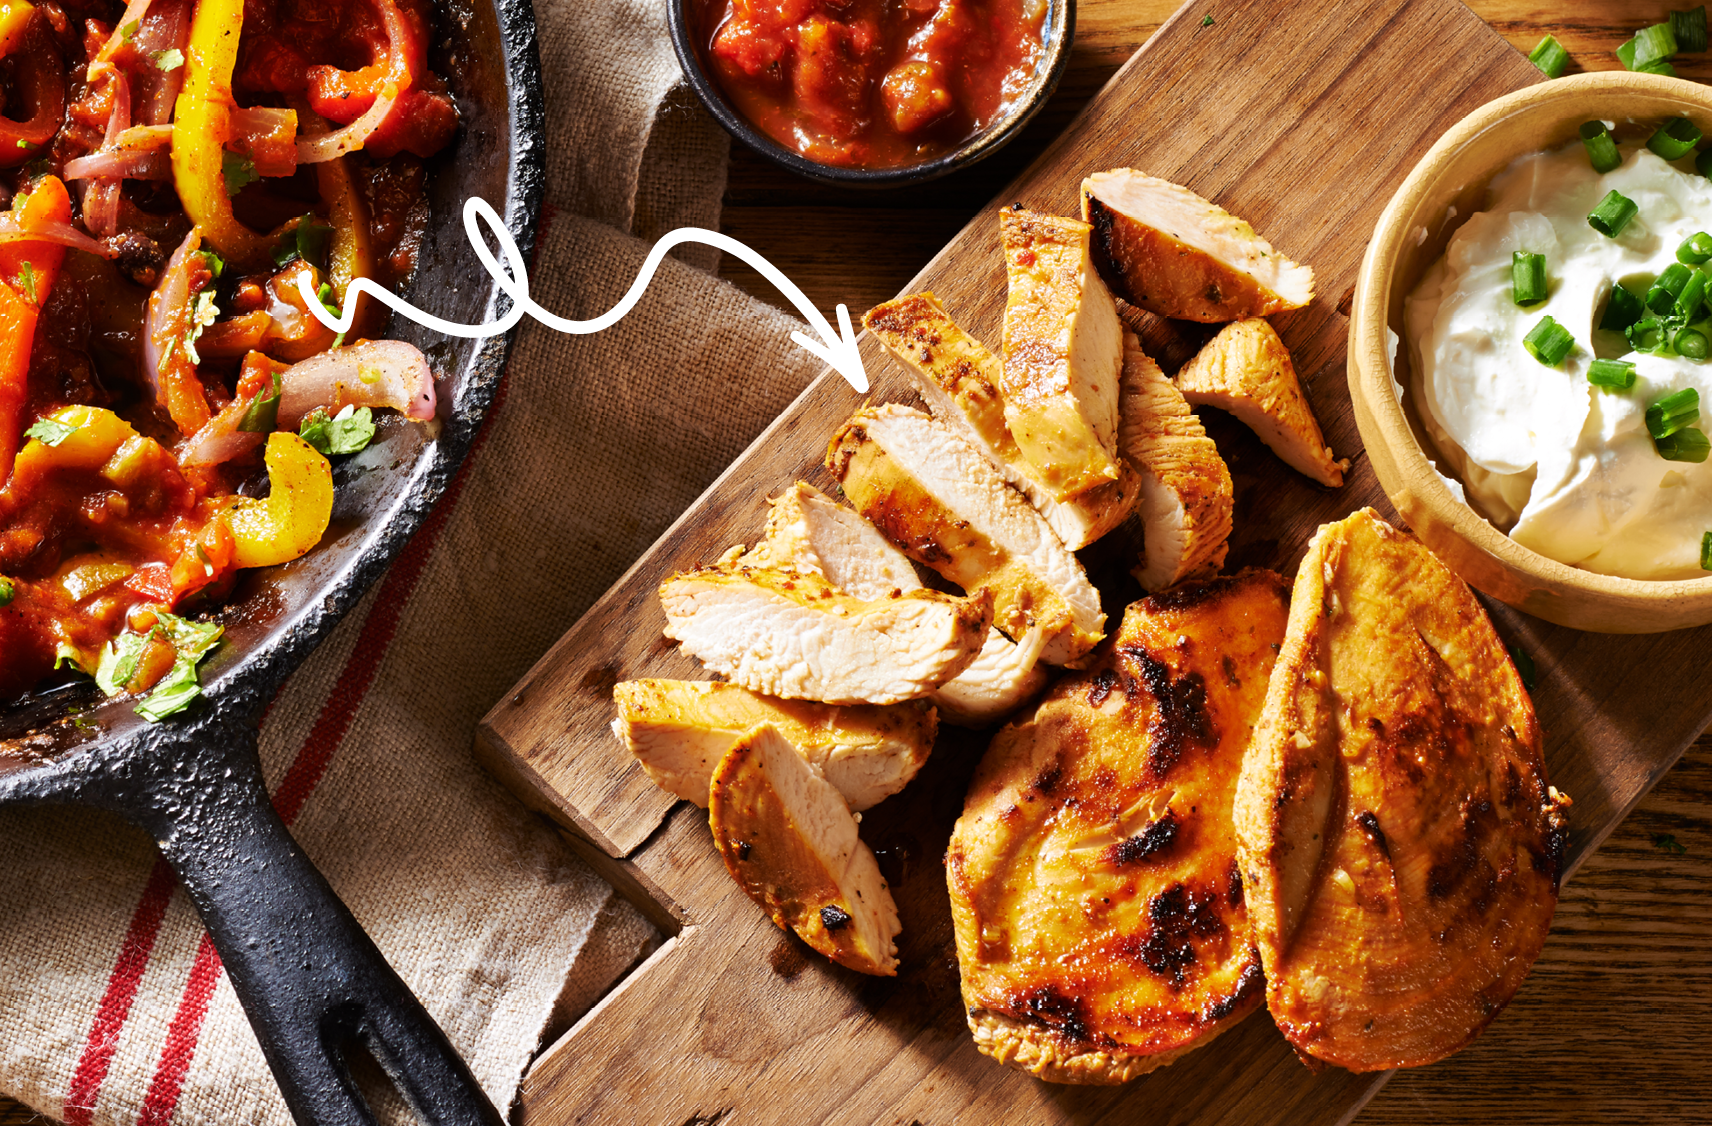 A roasted chicken sits on a cutting board with slices remove next to a cast iron fry pan with fajita ingredients